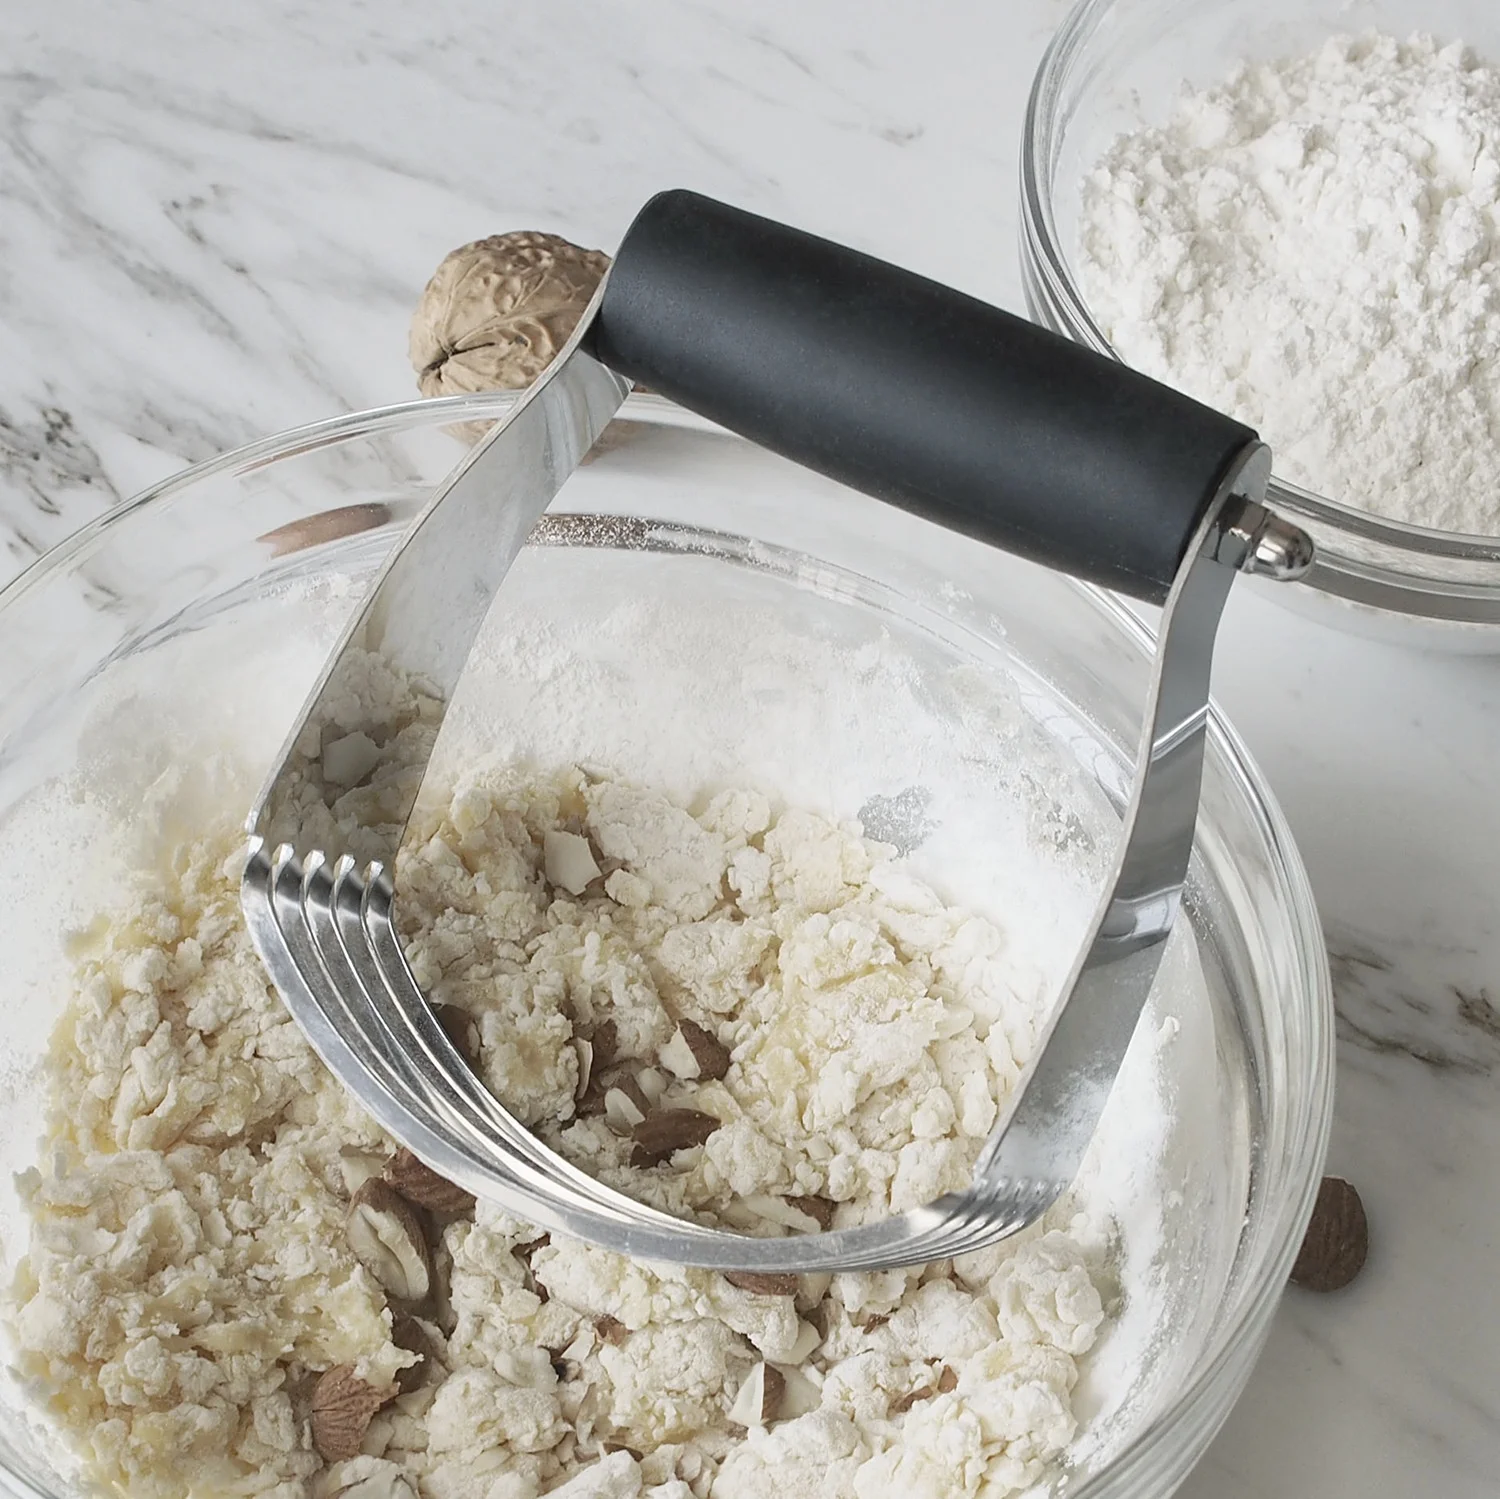 Pastry Blender: Professional Pastry Cutter | Heavy Duty Stainless Steel  Blades Cuts Butter Into Flour Quickly and Easily for Flaky Pie Crust and